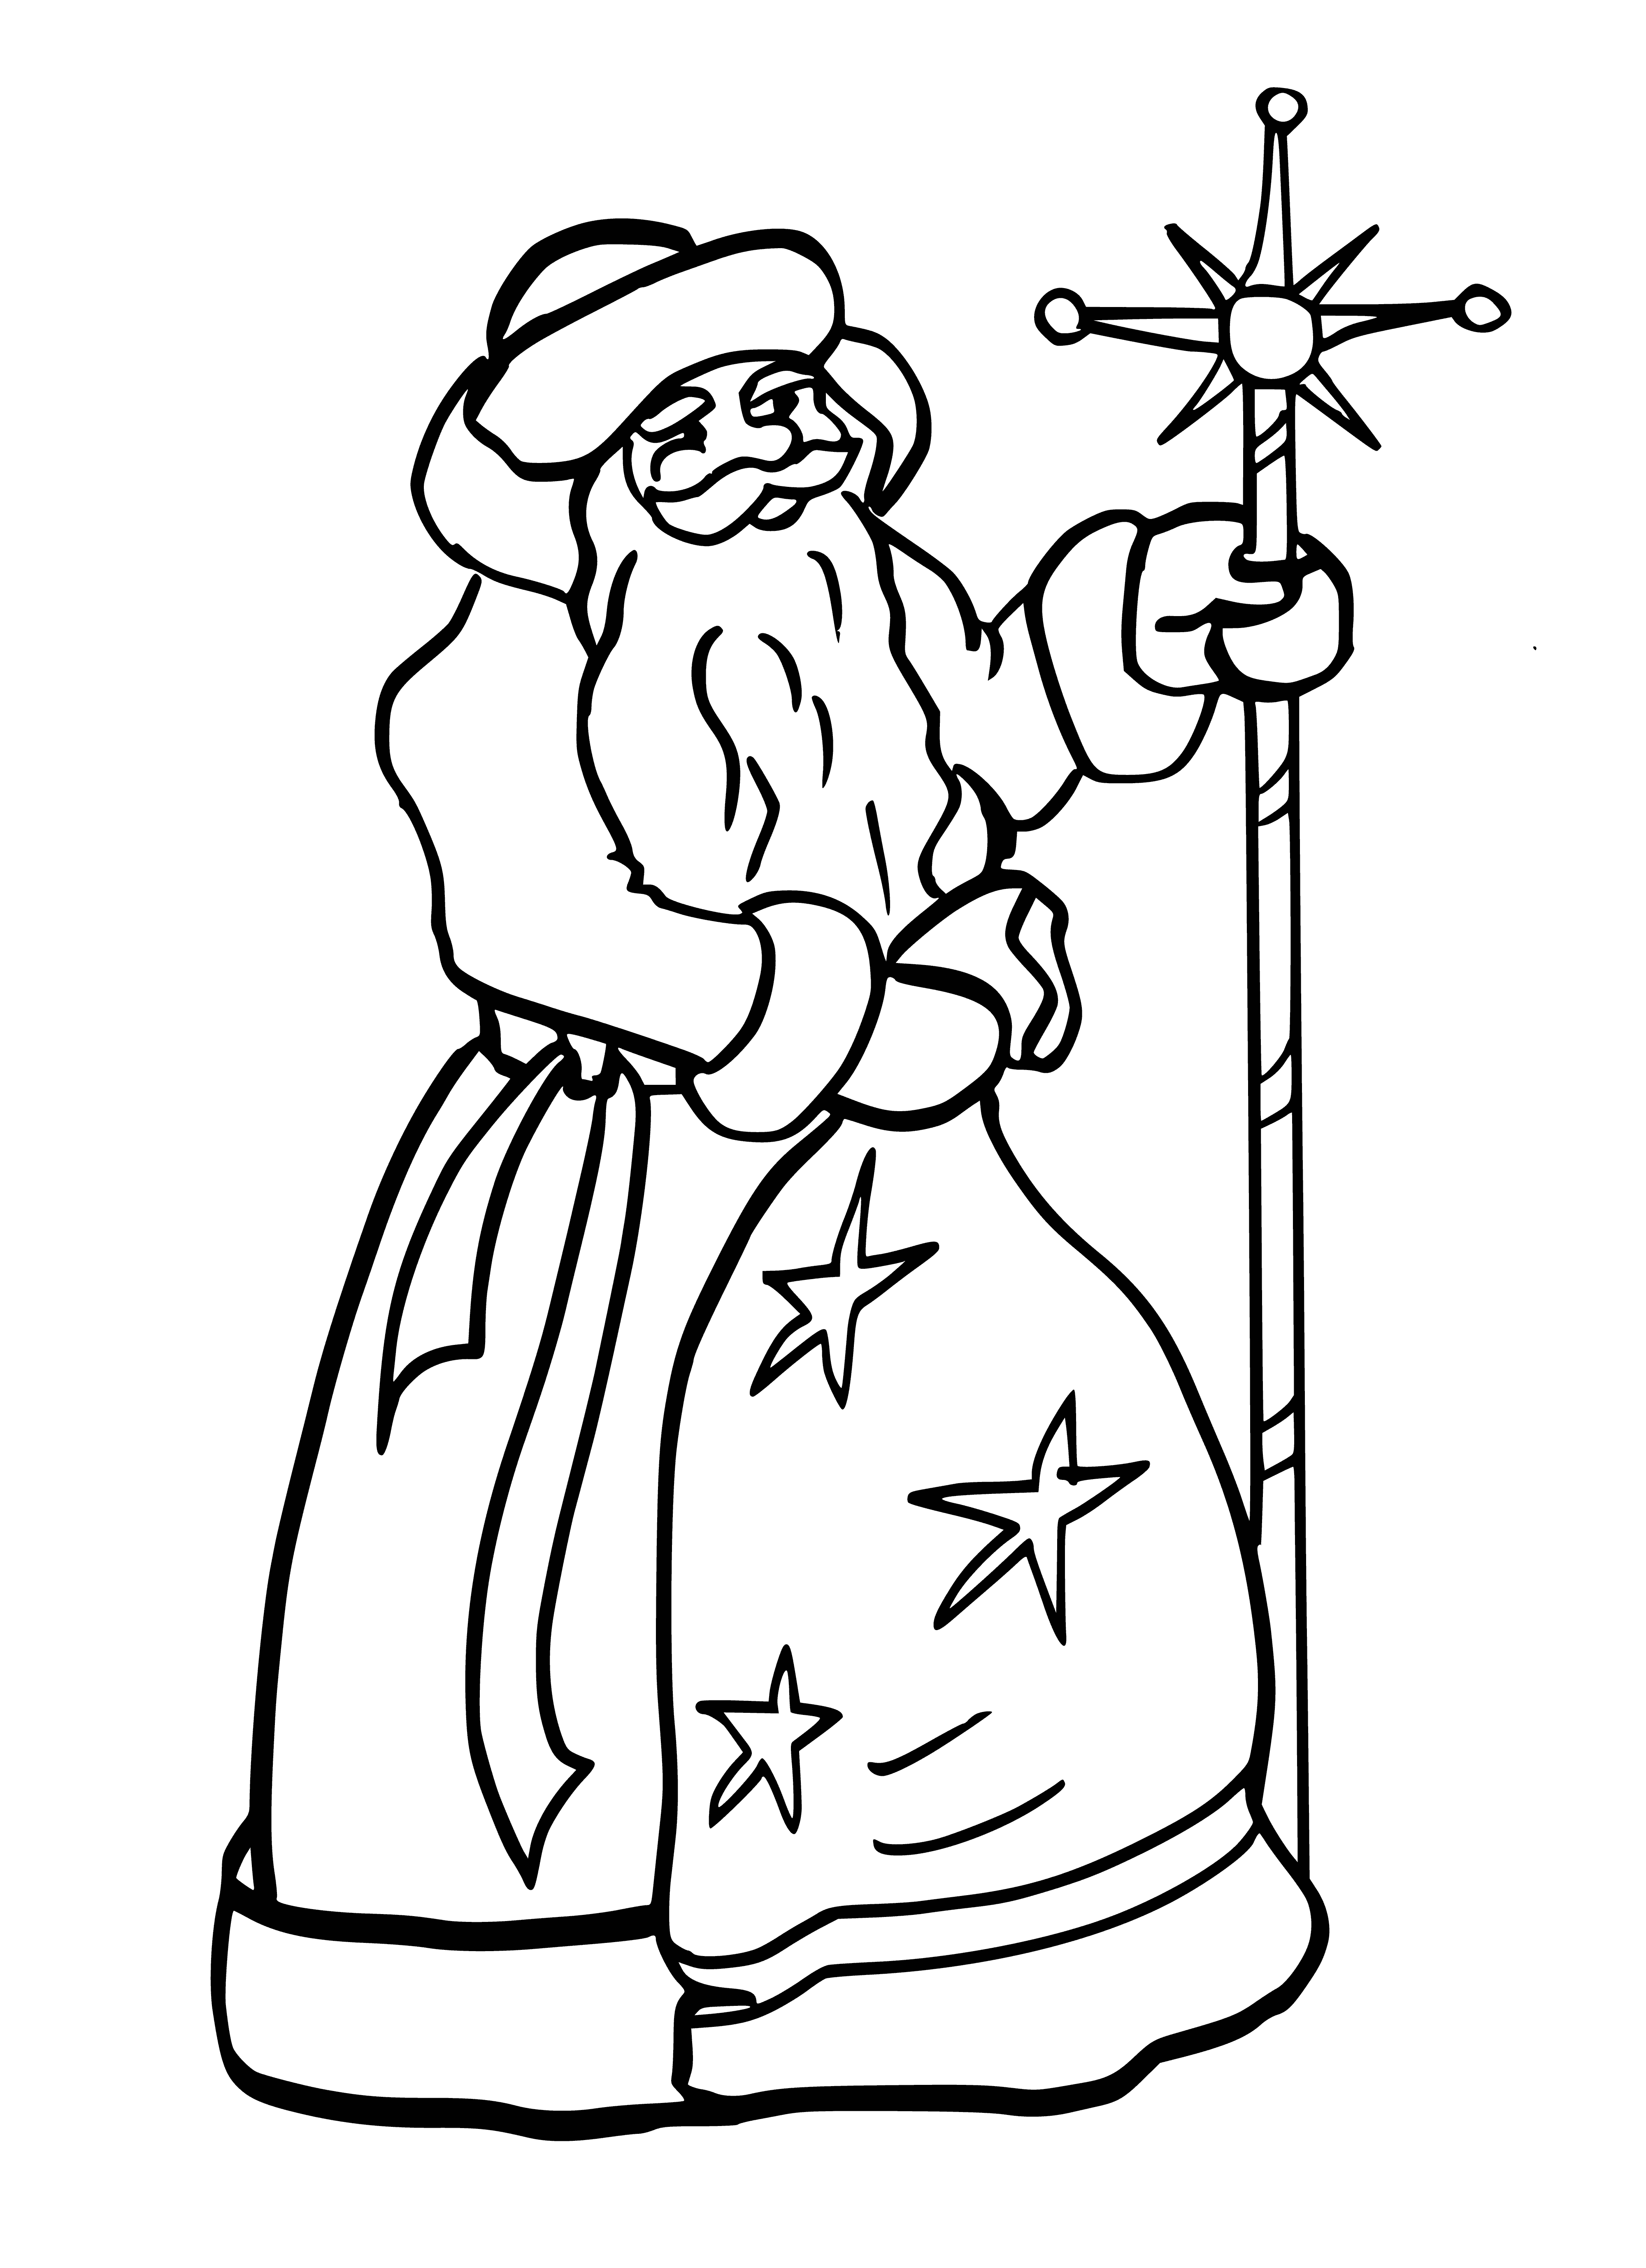 Santa Claus is jolly & holding a large bag full of presents in a red coat & hat with white fur trim! #Christmas #ColoringPage